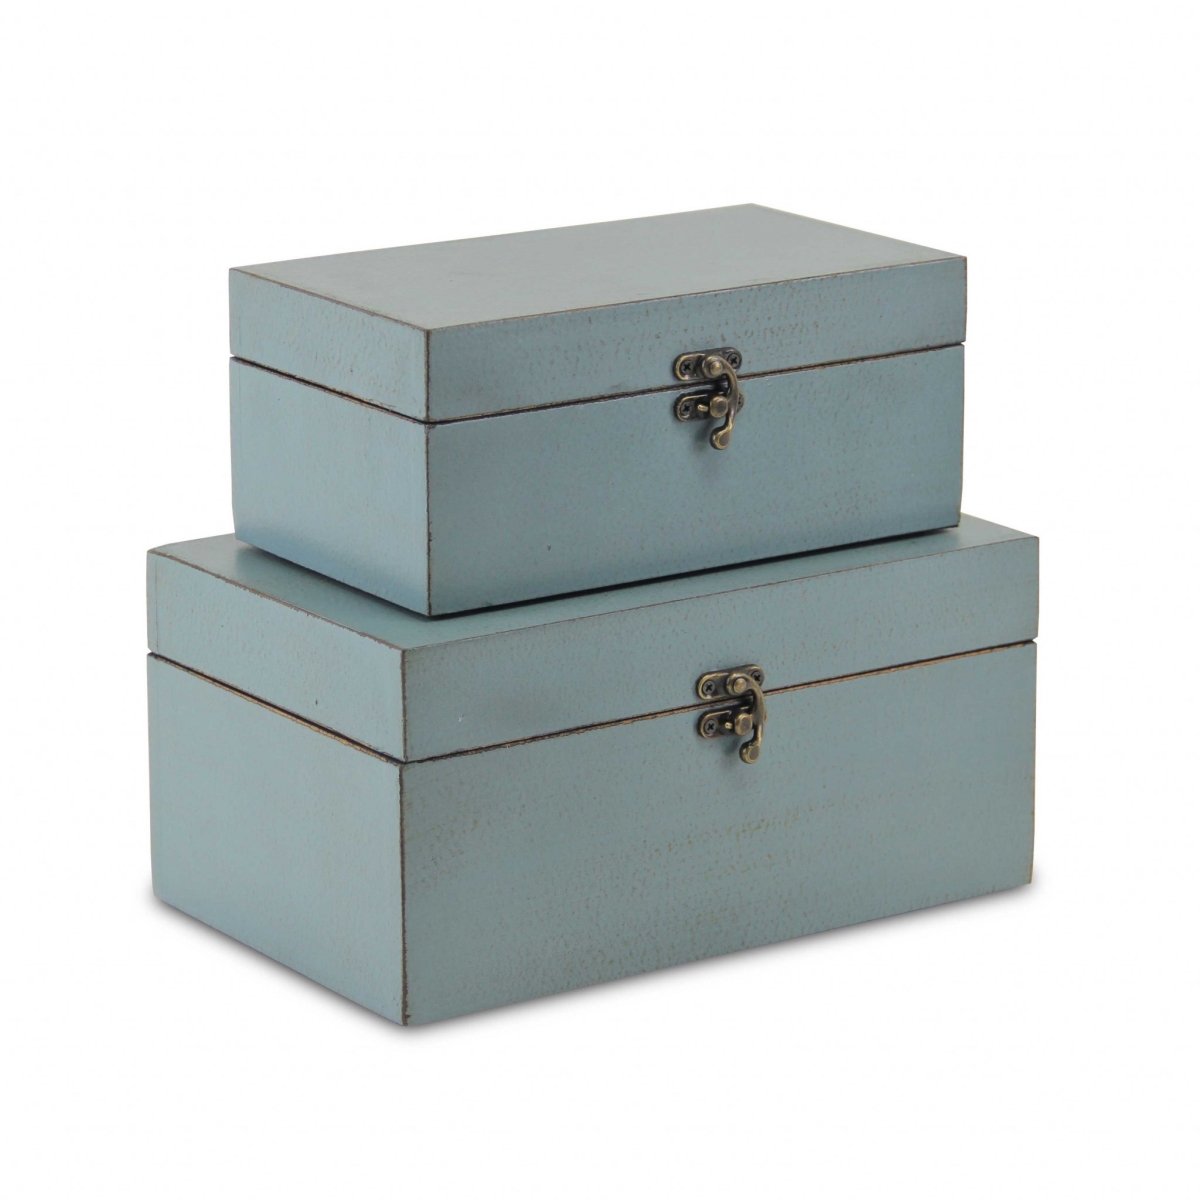 Picture of Homeroots 399678 Wooden Storage Boxes, Pale Blue - Set of 2